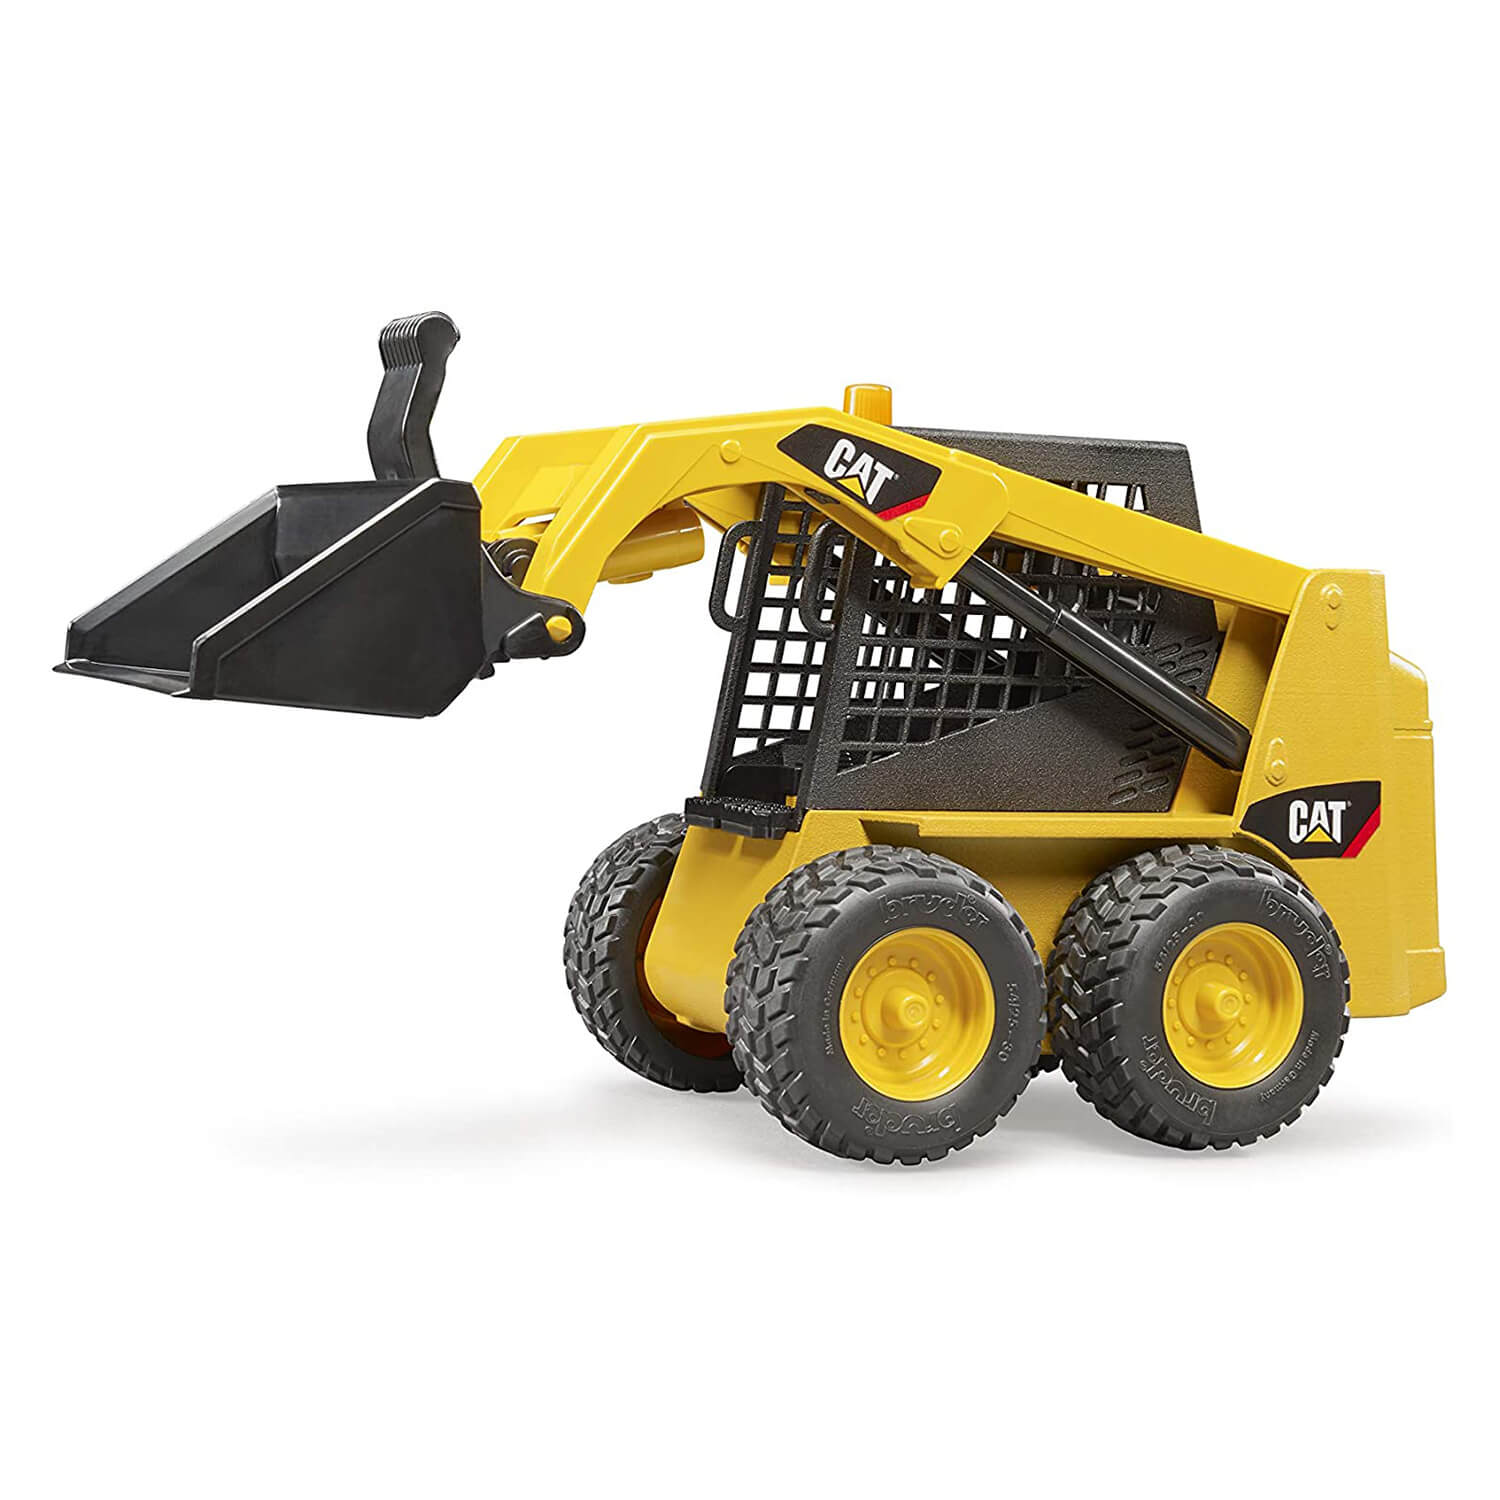 Side view of the Bruder Pro Series Caterpillar Skid Steer Loader 1:16 Scale Vehicle with the fully functional loader arm slightly lifted.